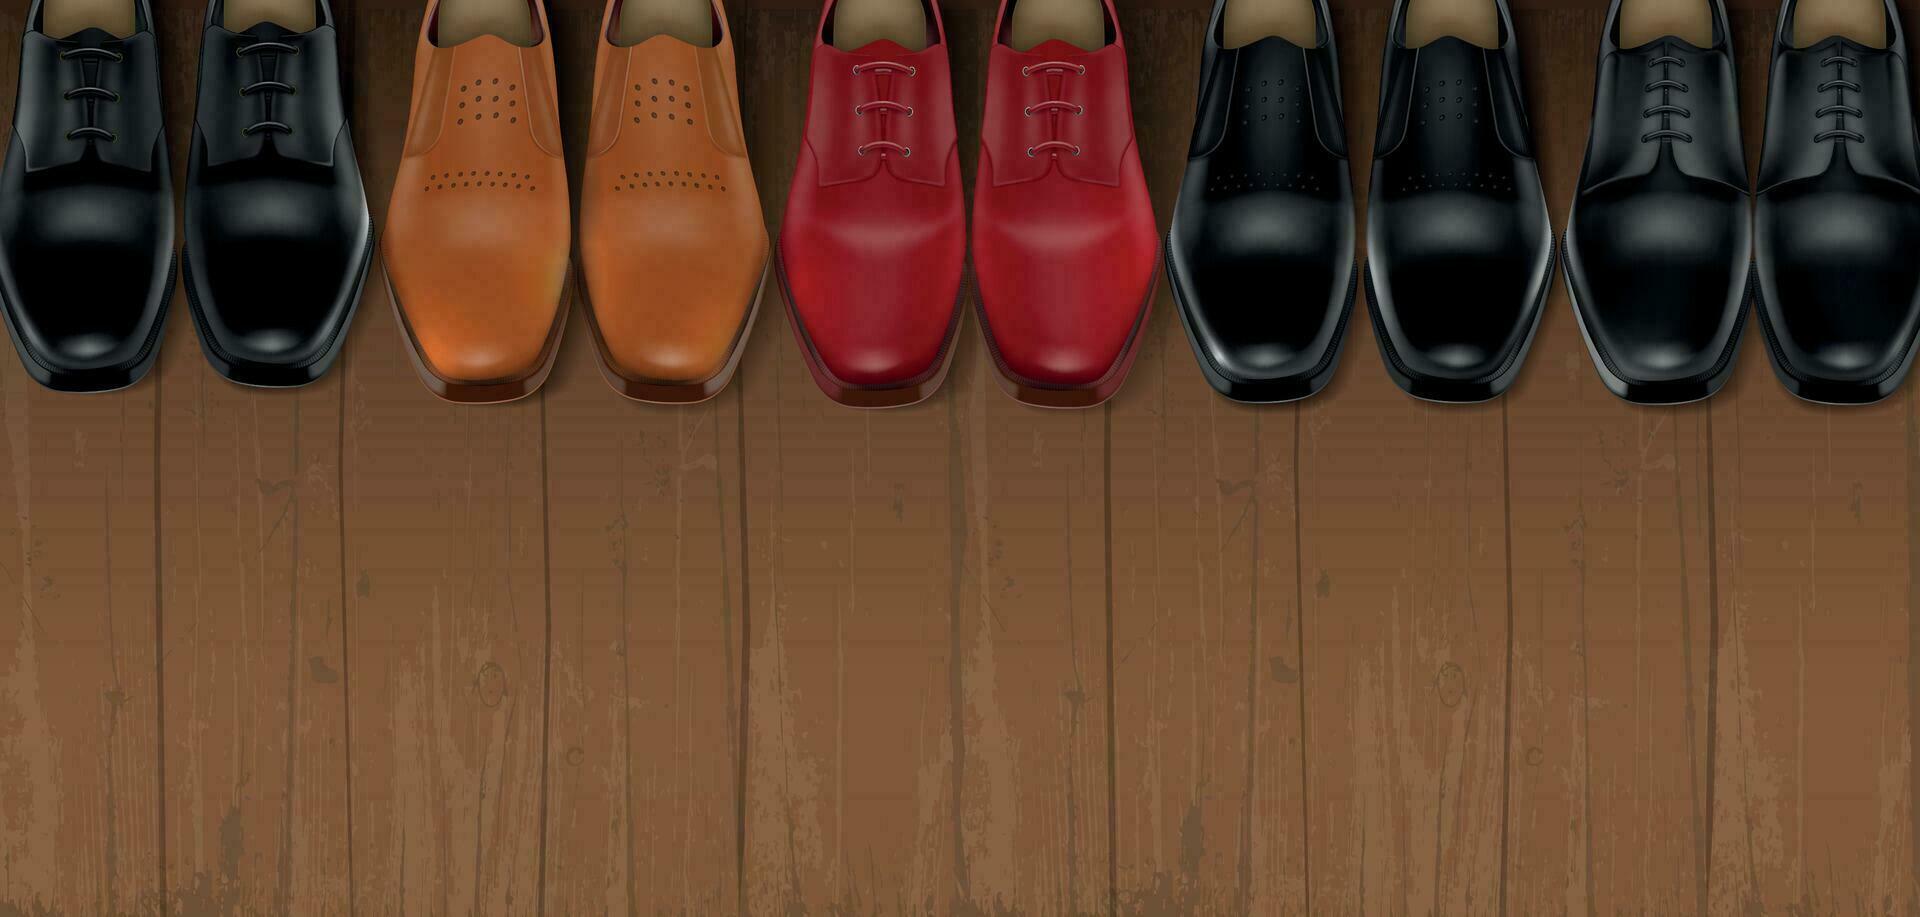 Leather Shoes On Wooden Floor vector